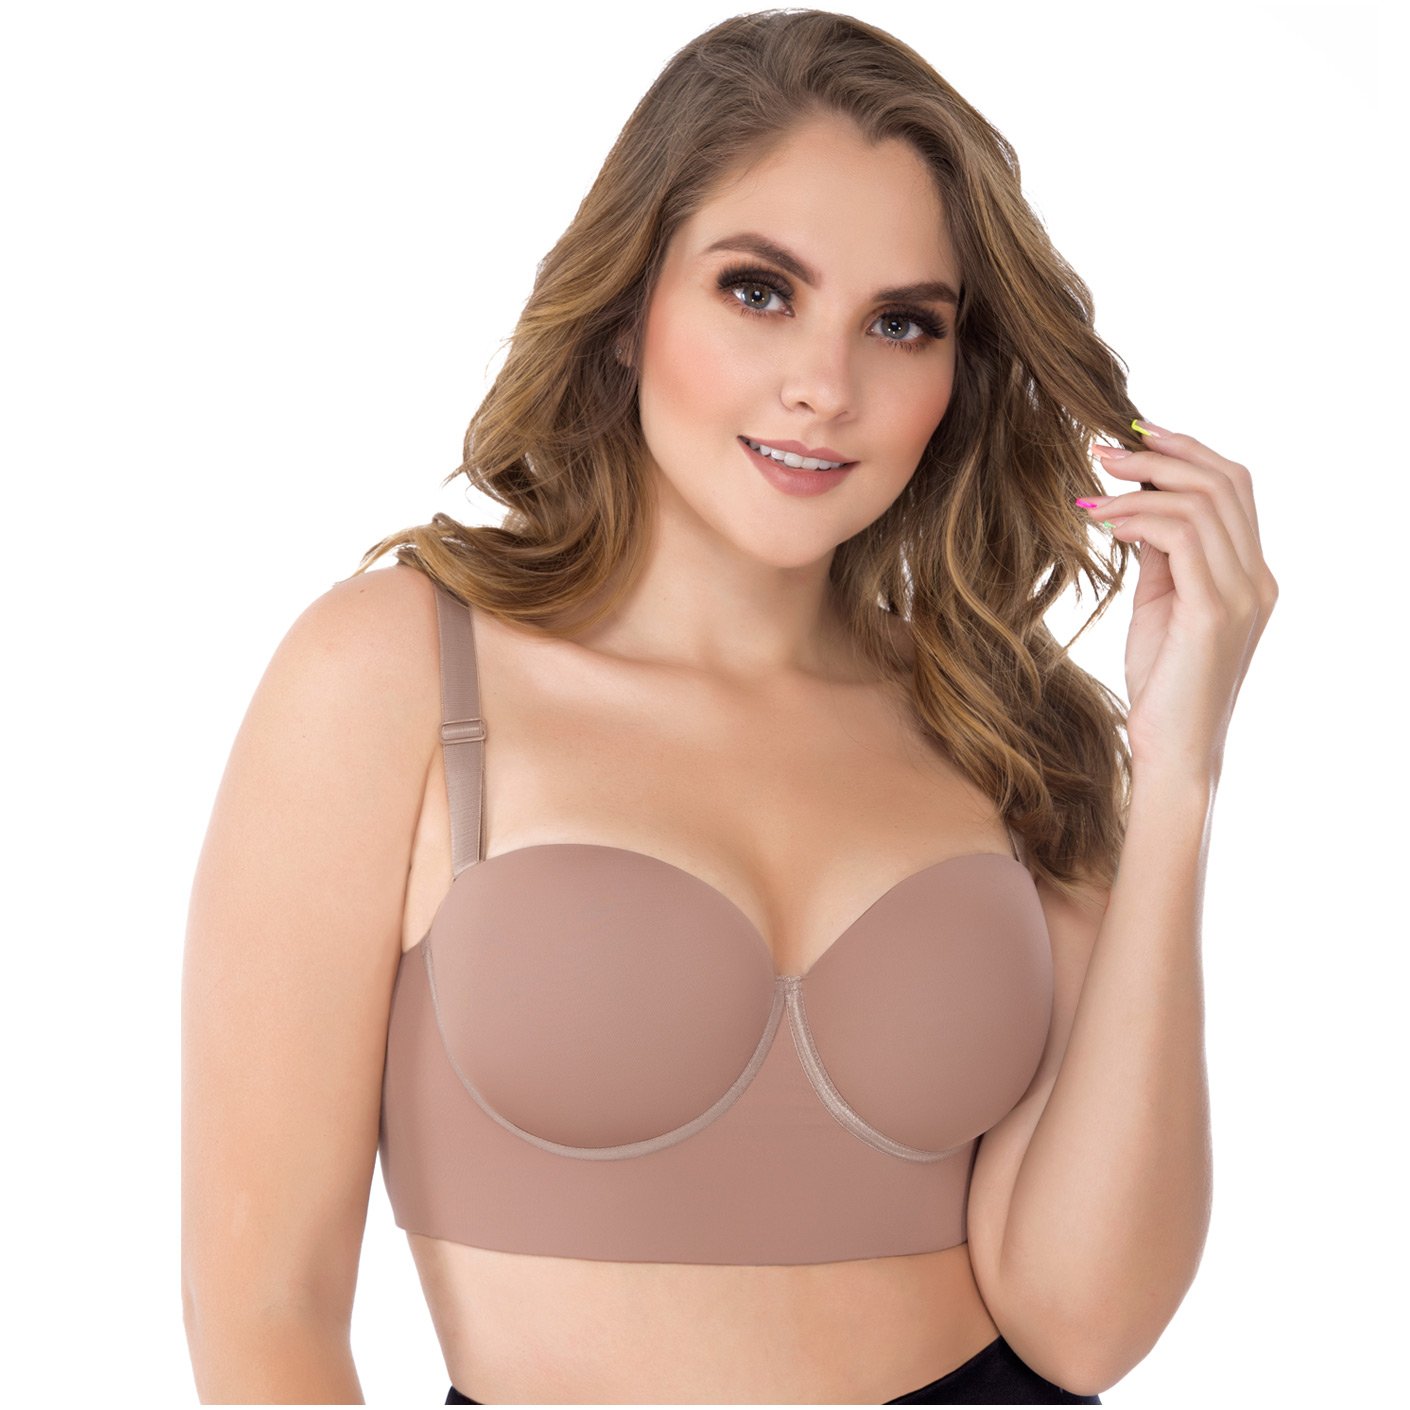 Uplady 8034 Firm Control Strapless Bra for Women